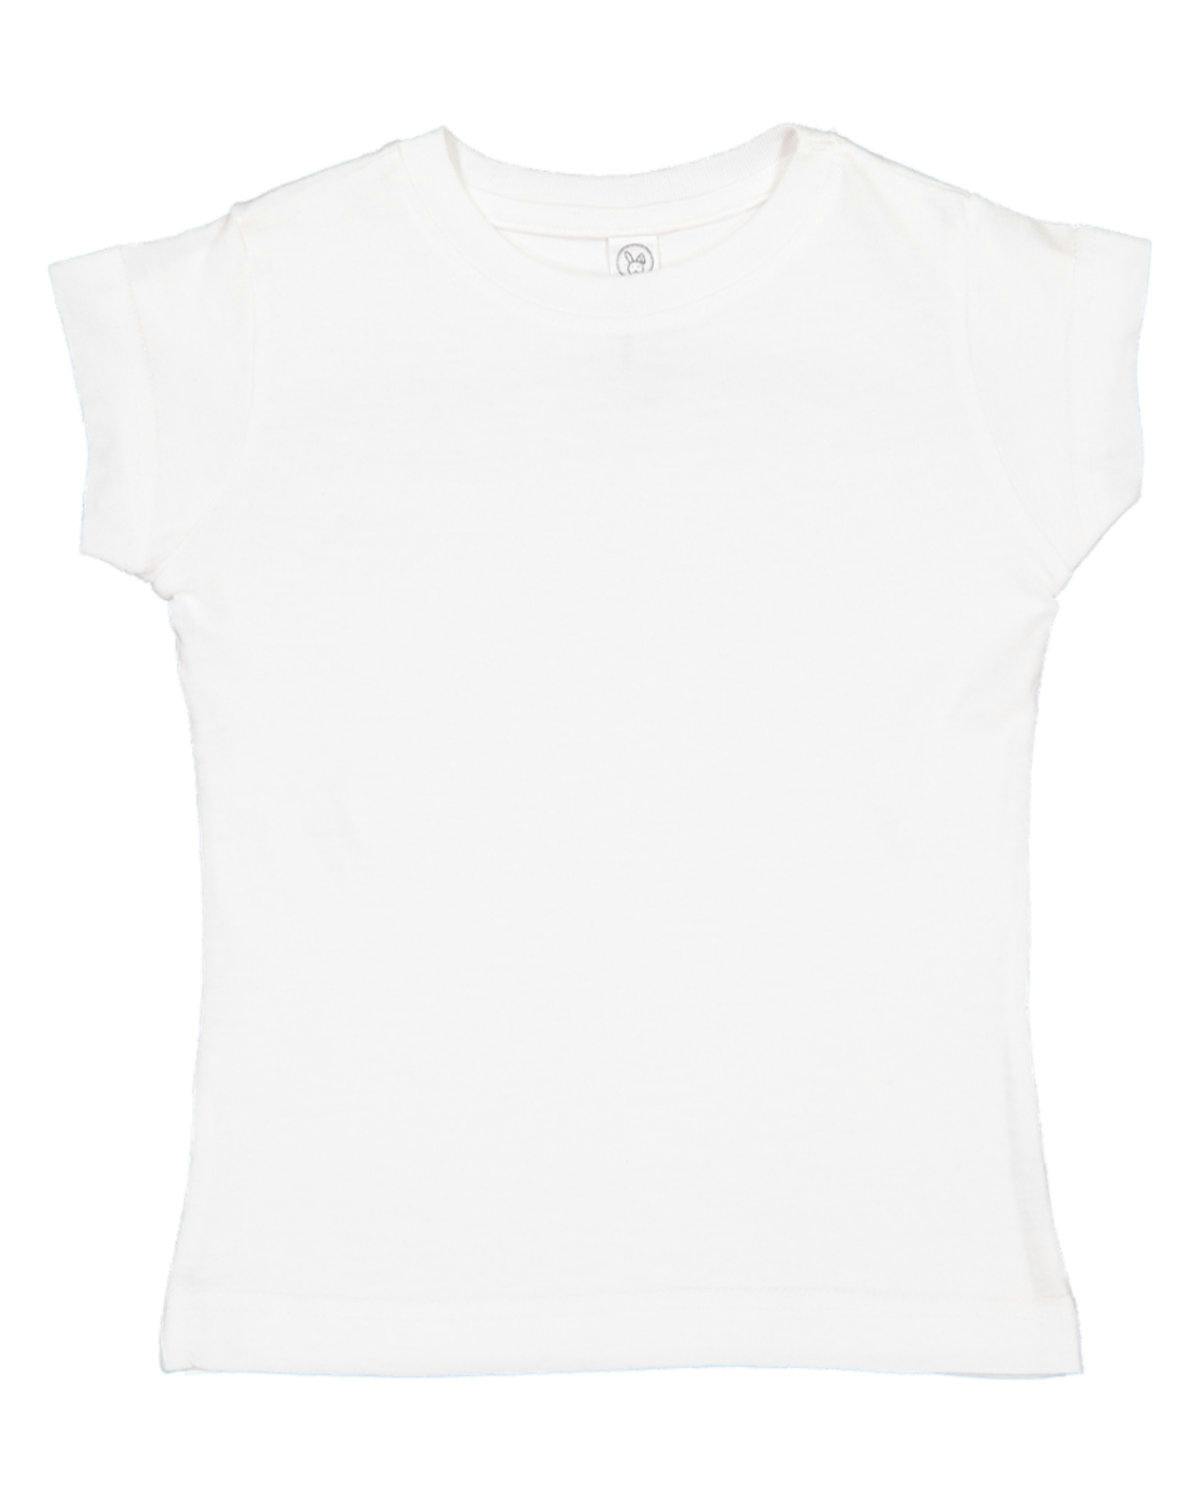 Image for Toddler Girls' Fine Jersey T-Shirt